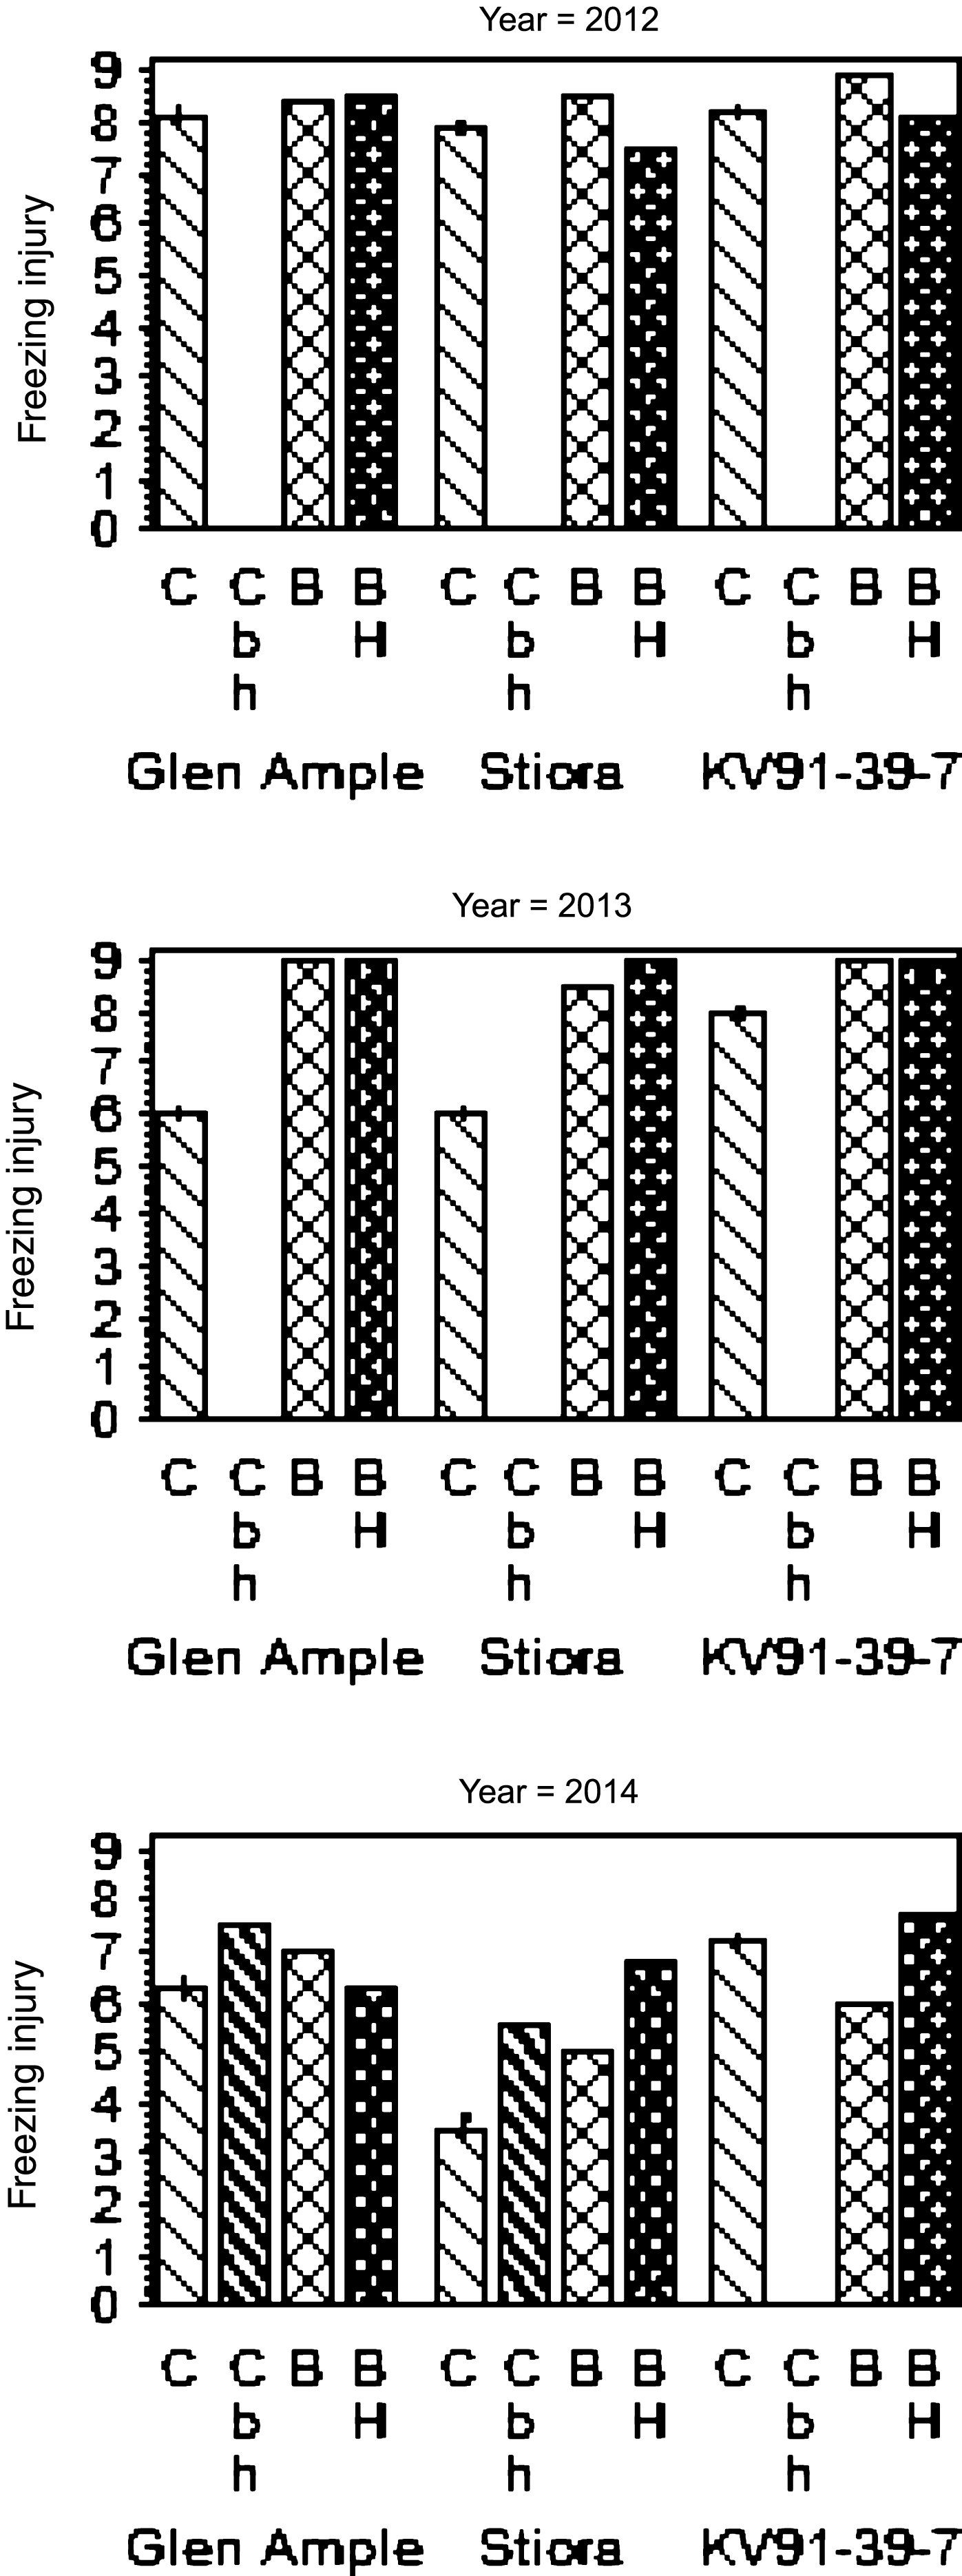 The effect of low-temperature stress avoidance treatments on freezing injury (rated 0–9 where 0 is dead buds and 9 fresh buds), in cane buds of three raspberry cultivars in three years in mid-Norway. C = erect canes the whole year (Control = treatment D); Cbh = erect canes April–October 2014 at bent and heated plots; B = bent and covered plots with erect canes May–October; BH = bent and heated plots October–May. Cbh is similar to BH except that canes were raised into erect position approx. one month earlier than for BH. Bars on the top of the left column of each cultivar indicate standard error within the cultivar.